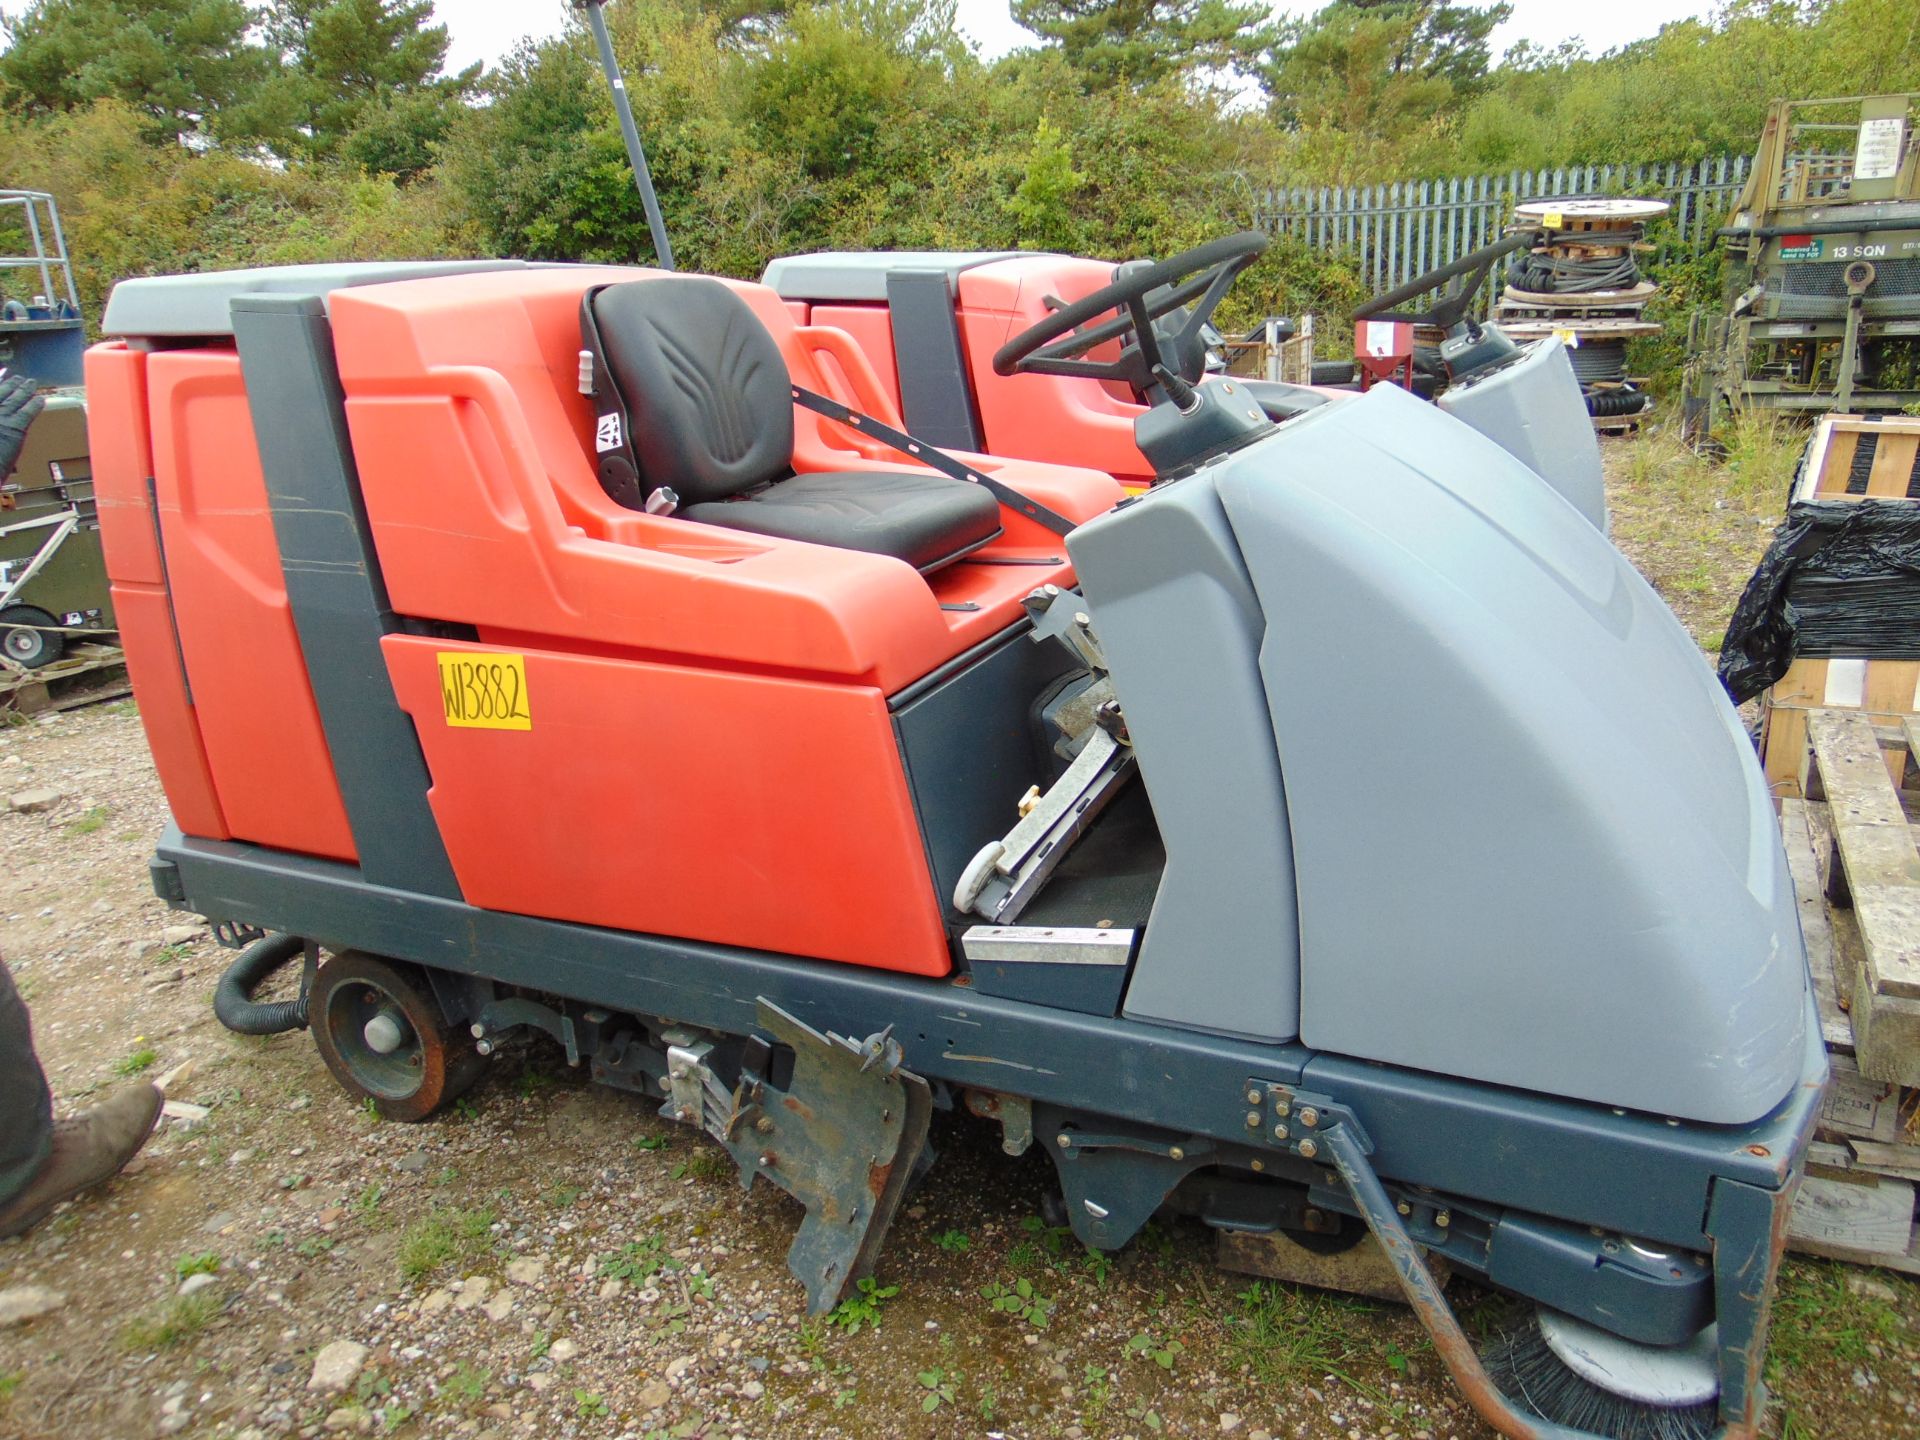 Hakomatic B 310 R CL Ride on Sweeper Scrubber